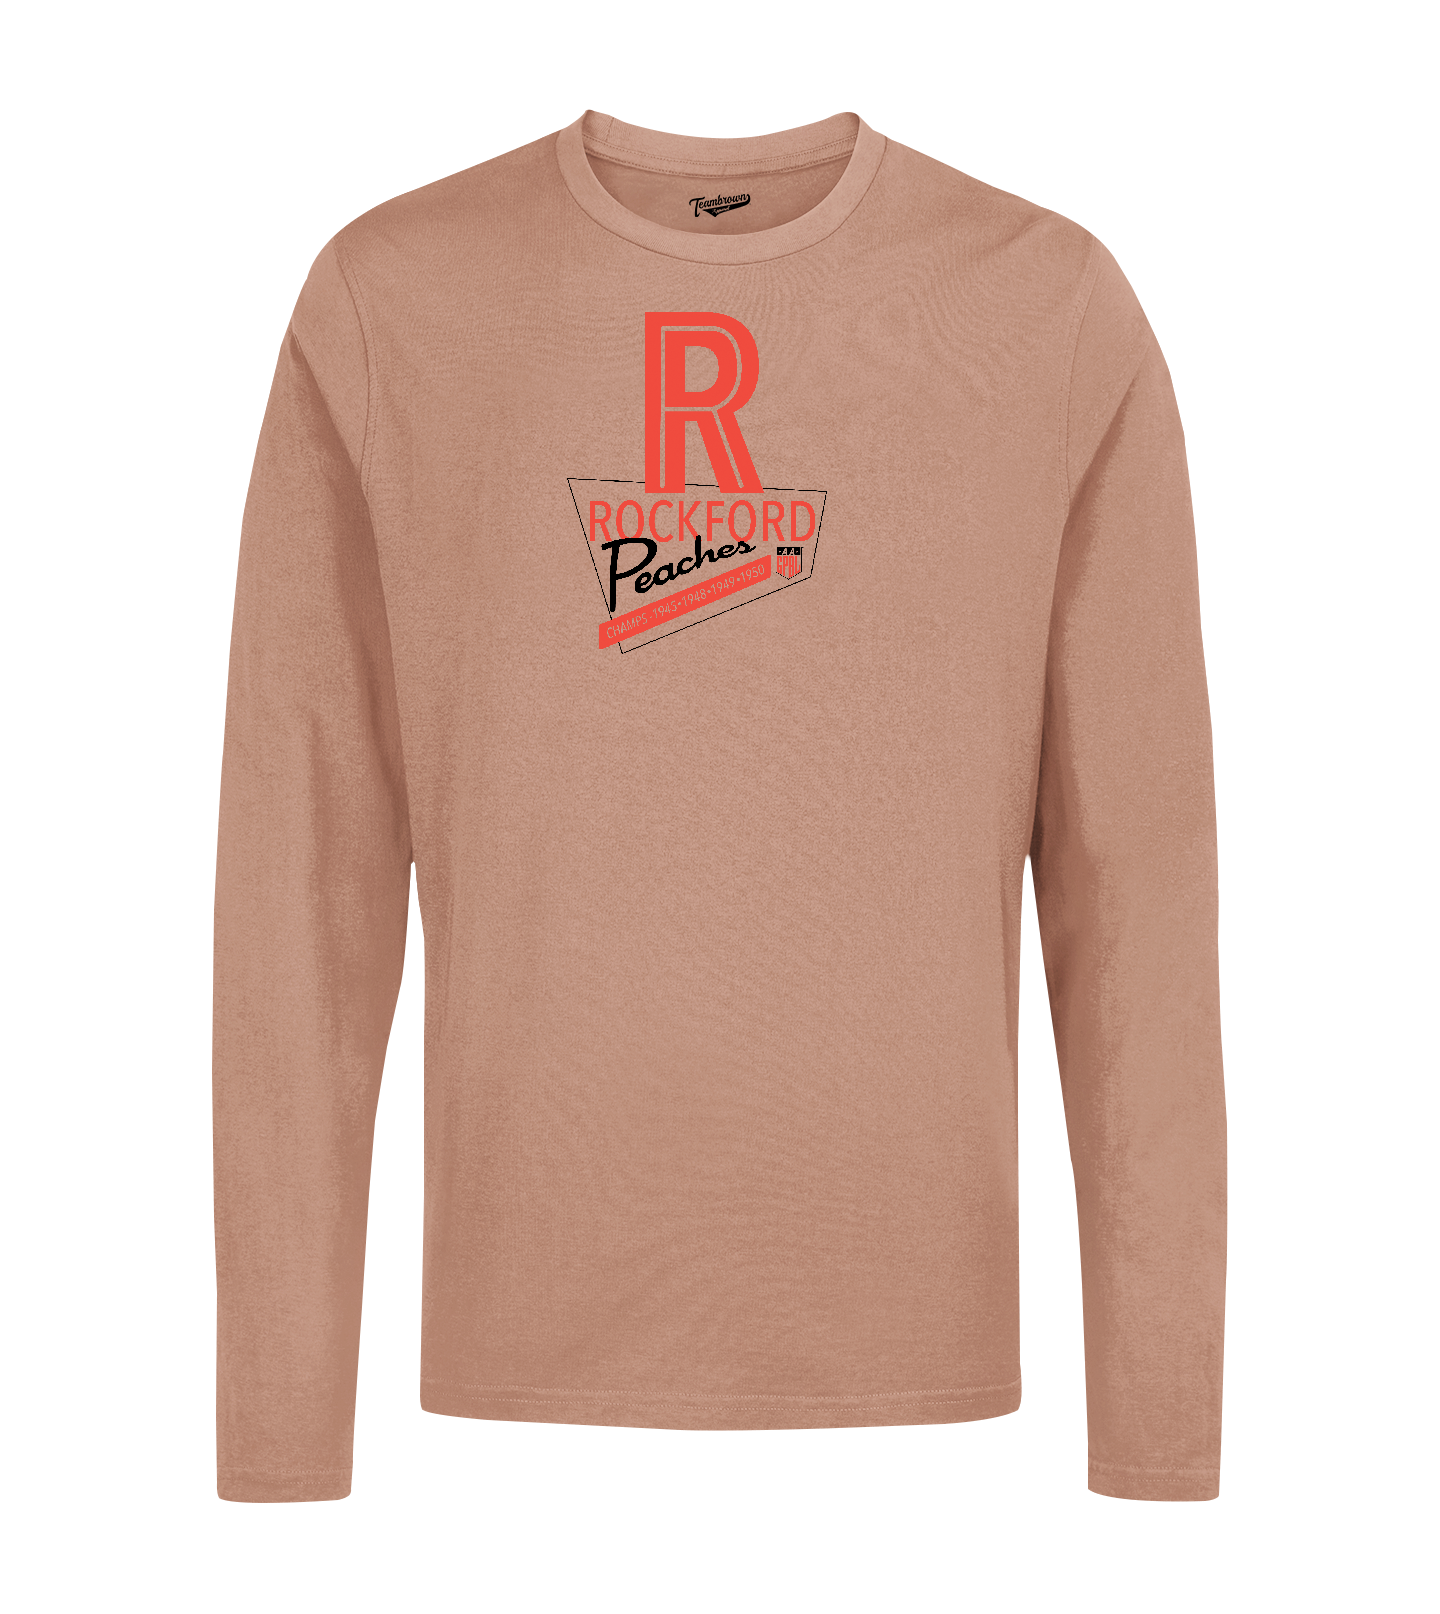 Rockford Peaches Champions - Unisex Long Sleeve Crew T-Shirt | Officially Licensed - AAGPBL